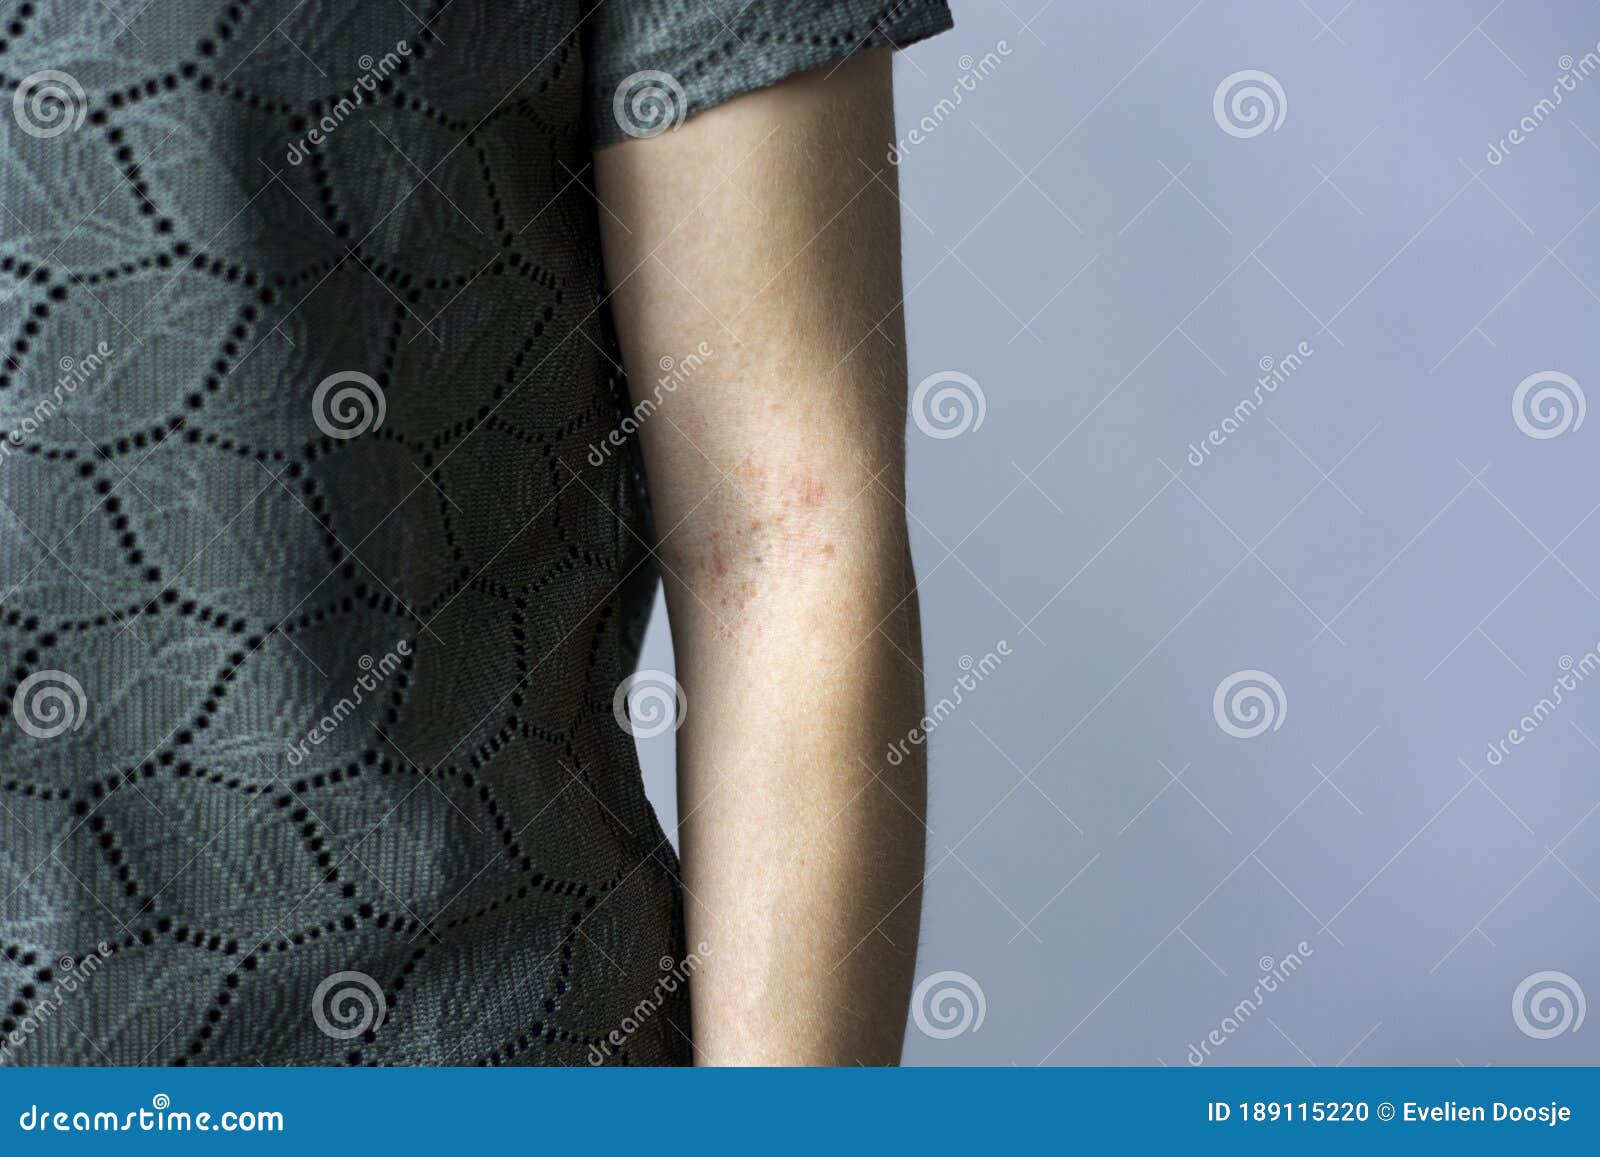 Red Itchy Bumps On Skin Arms